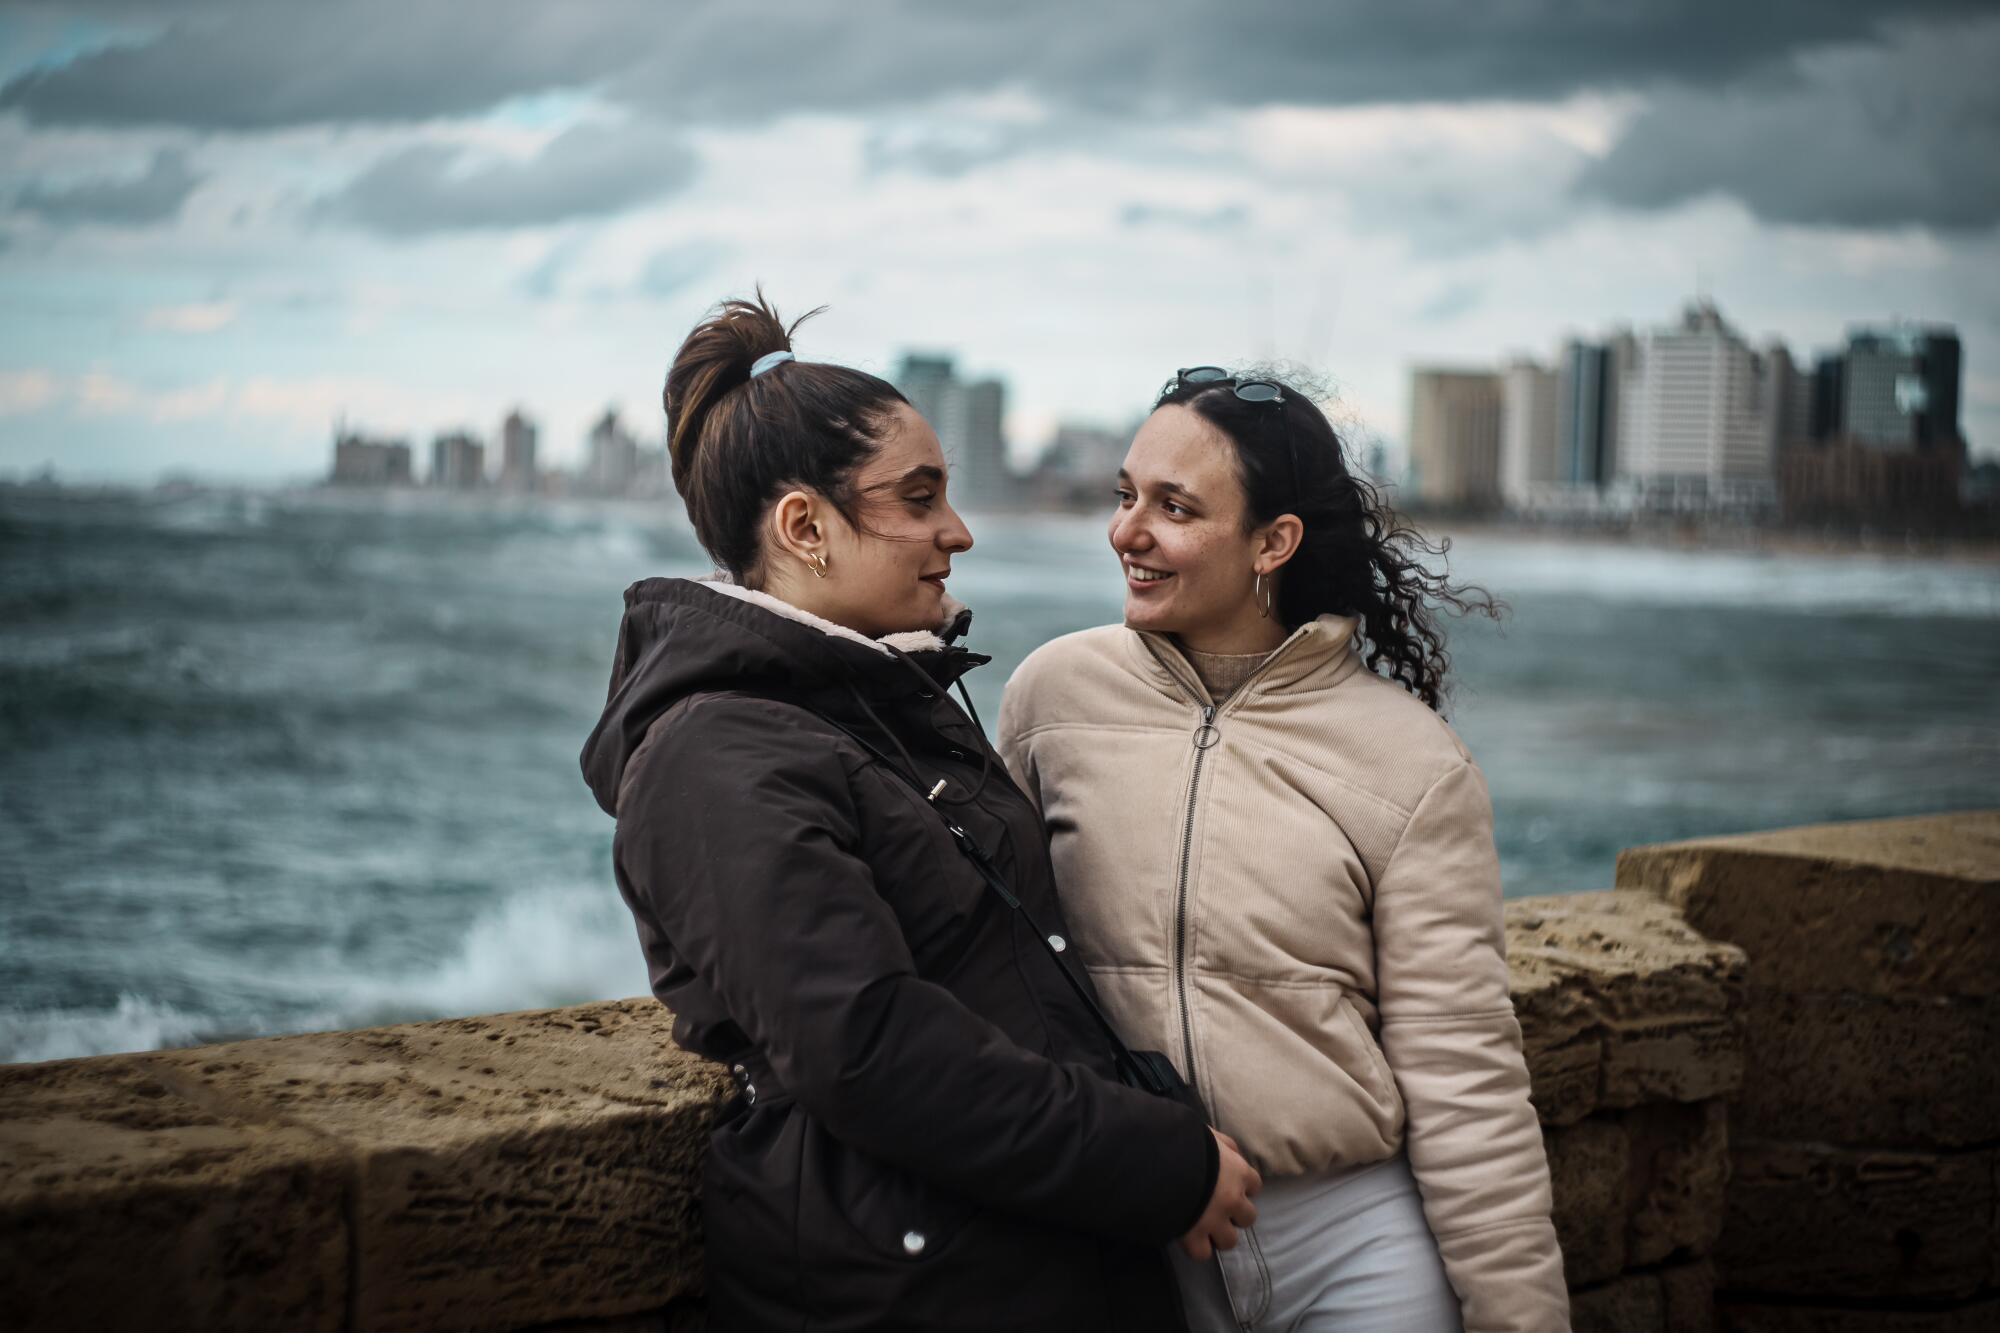 Angelina Shakkour and Adar Hirak Asaf share a moment together on a stormy day.